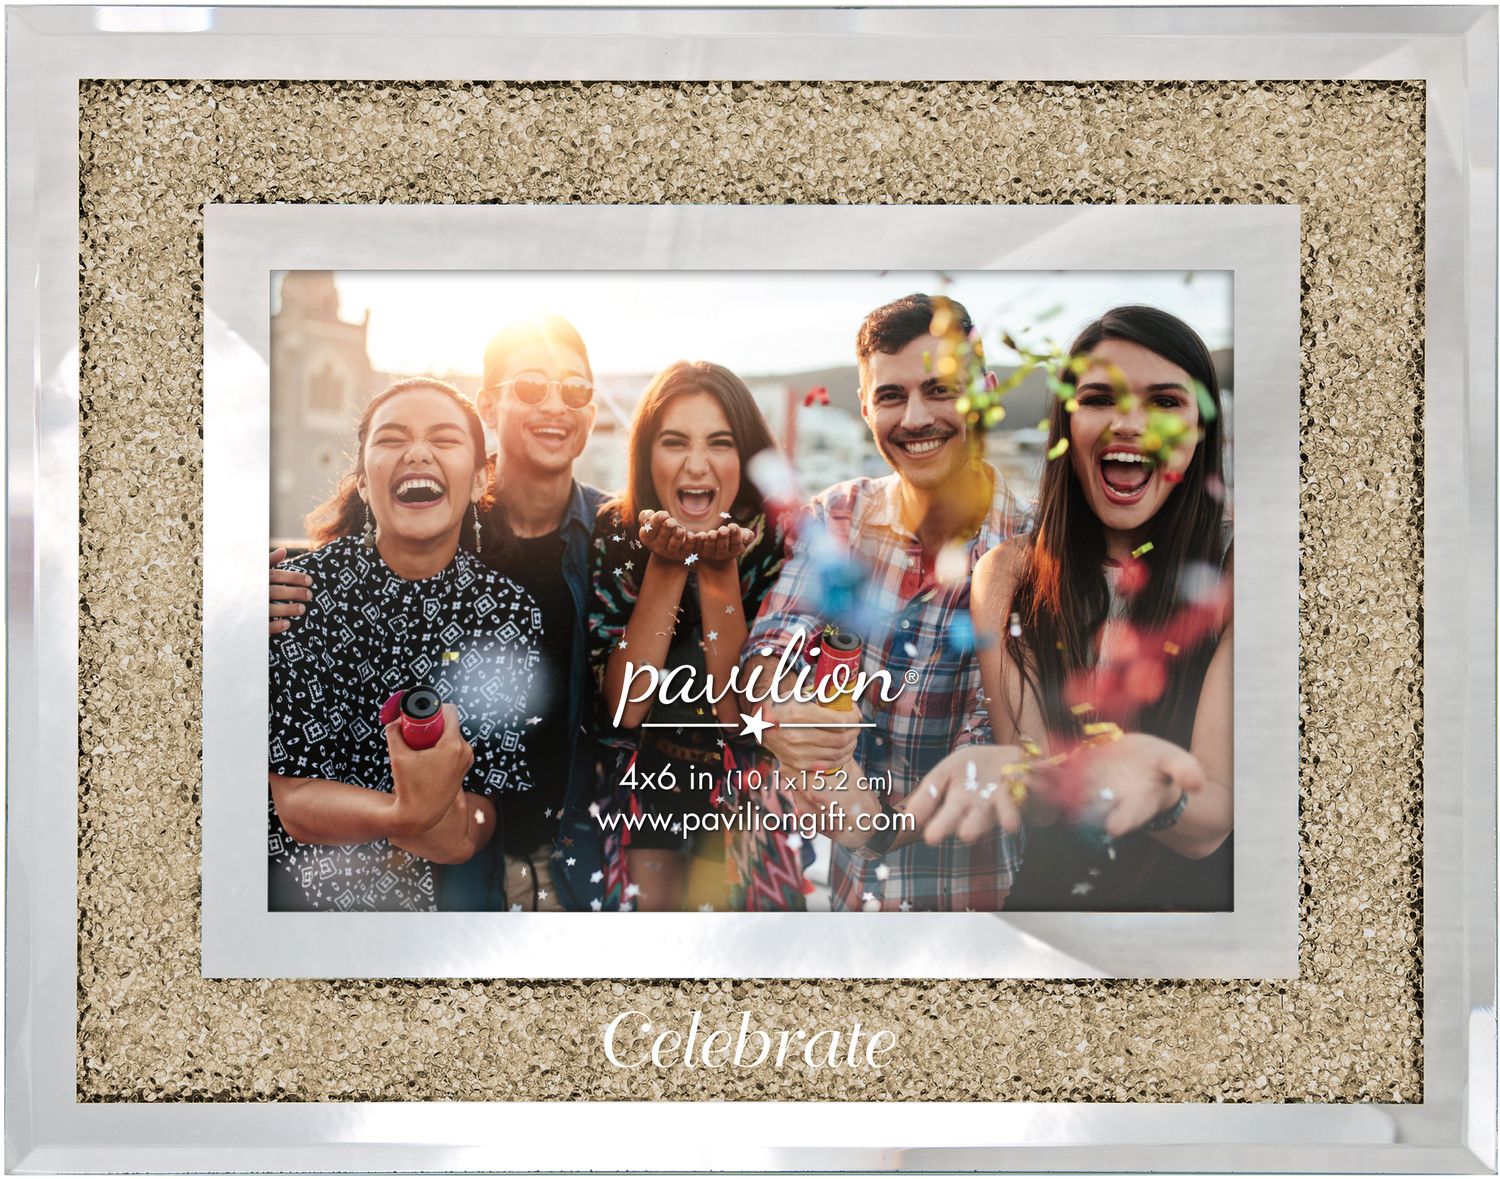 Celebrate by Glorious Occasions - Celebrate - 7.25" x 9.25" Frame (Holds  4" x 6" Photo)